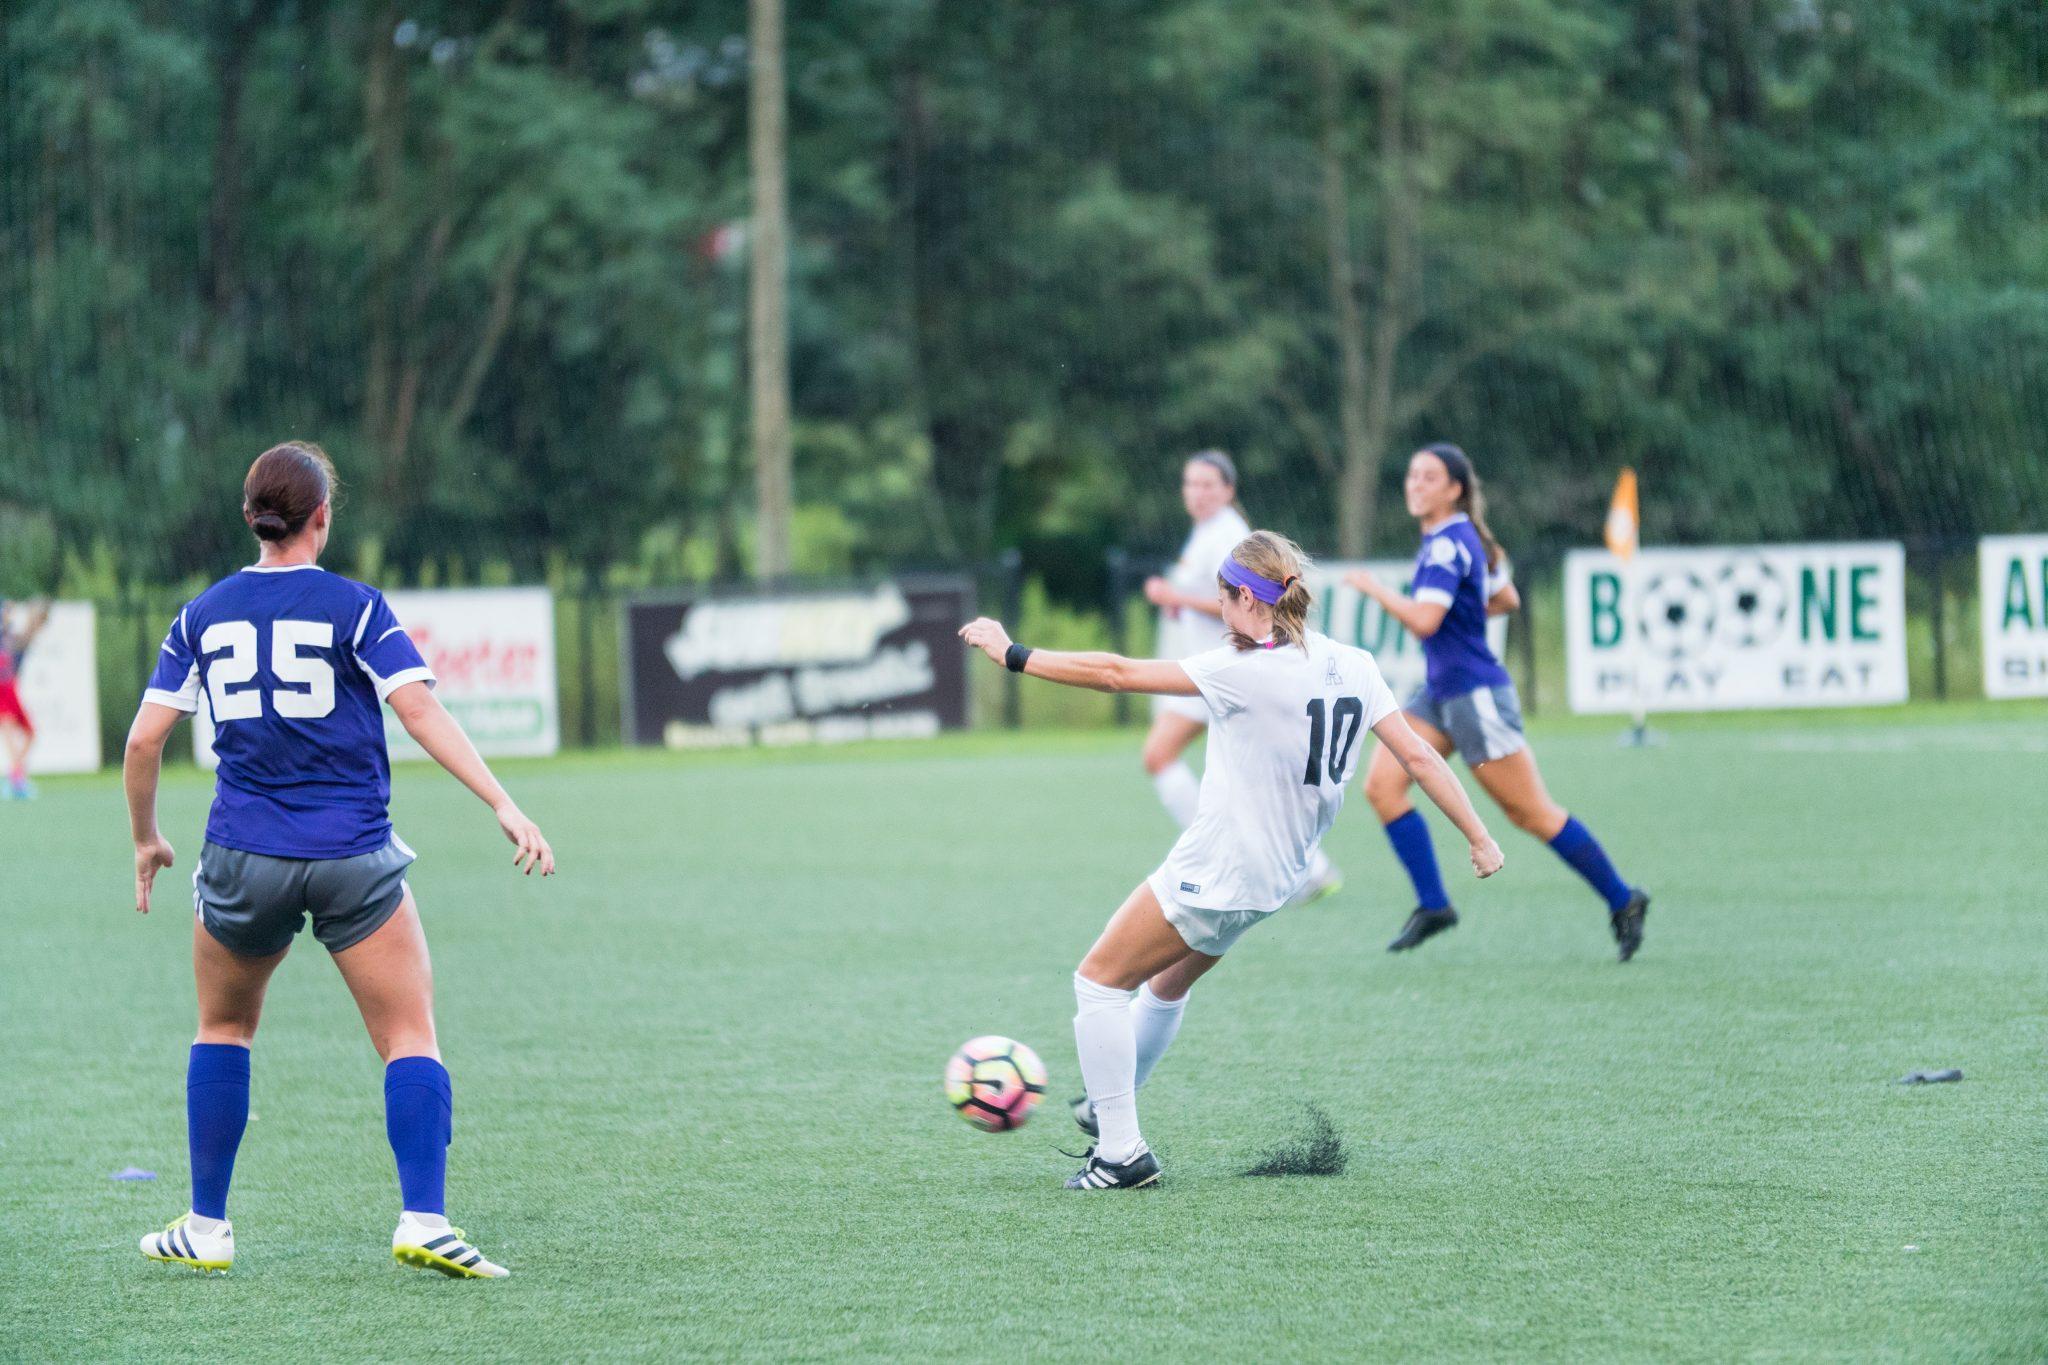 Senior Jane Cline fights for the ball in Thursdays game against Western Carolina. 
Photo By: Maleek Loyd